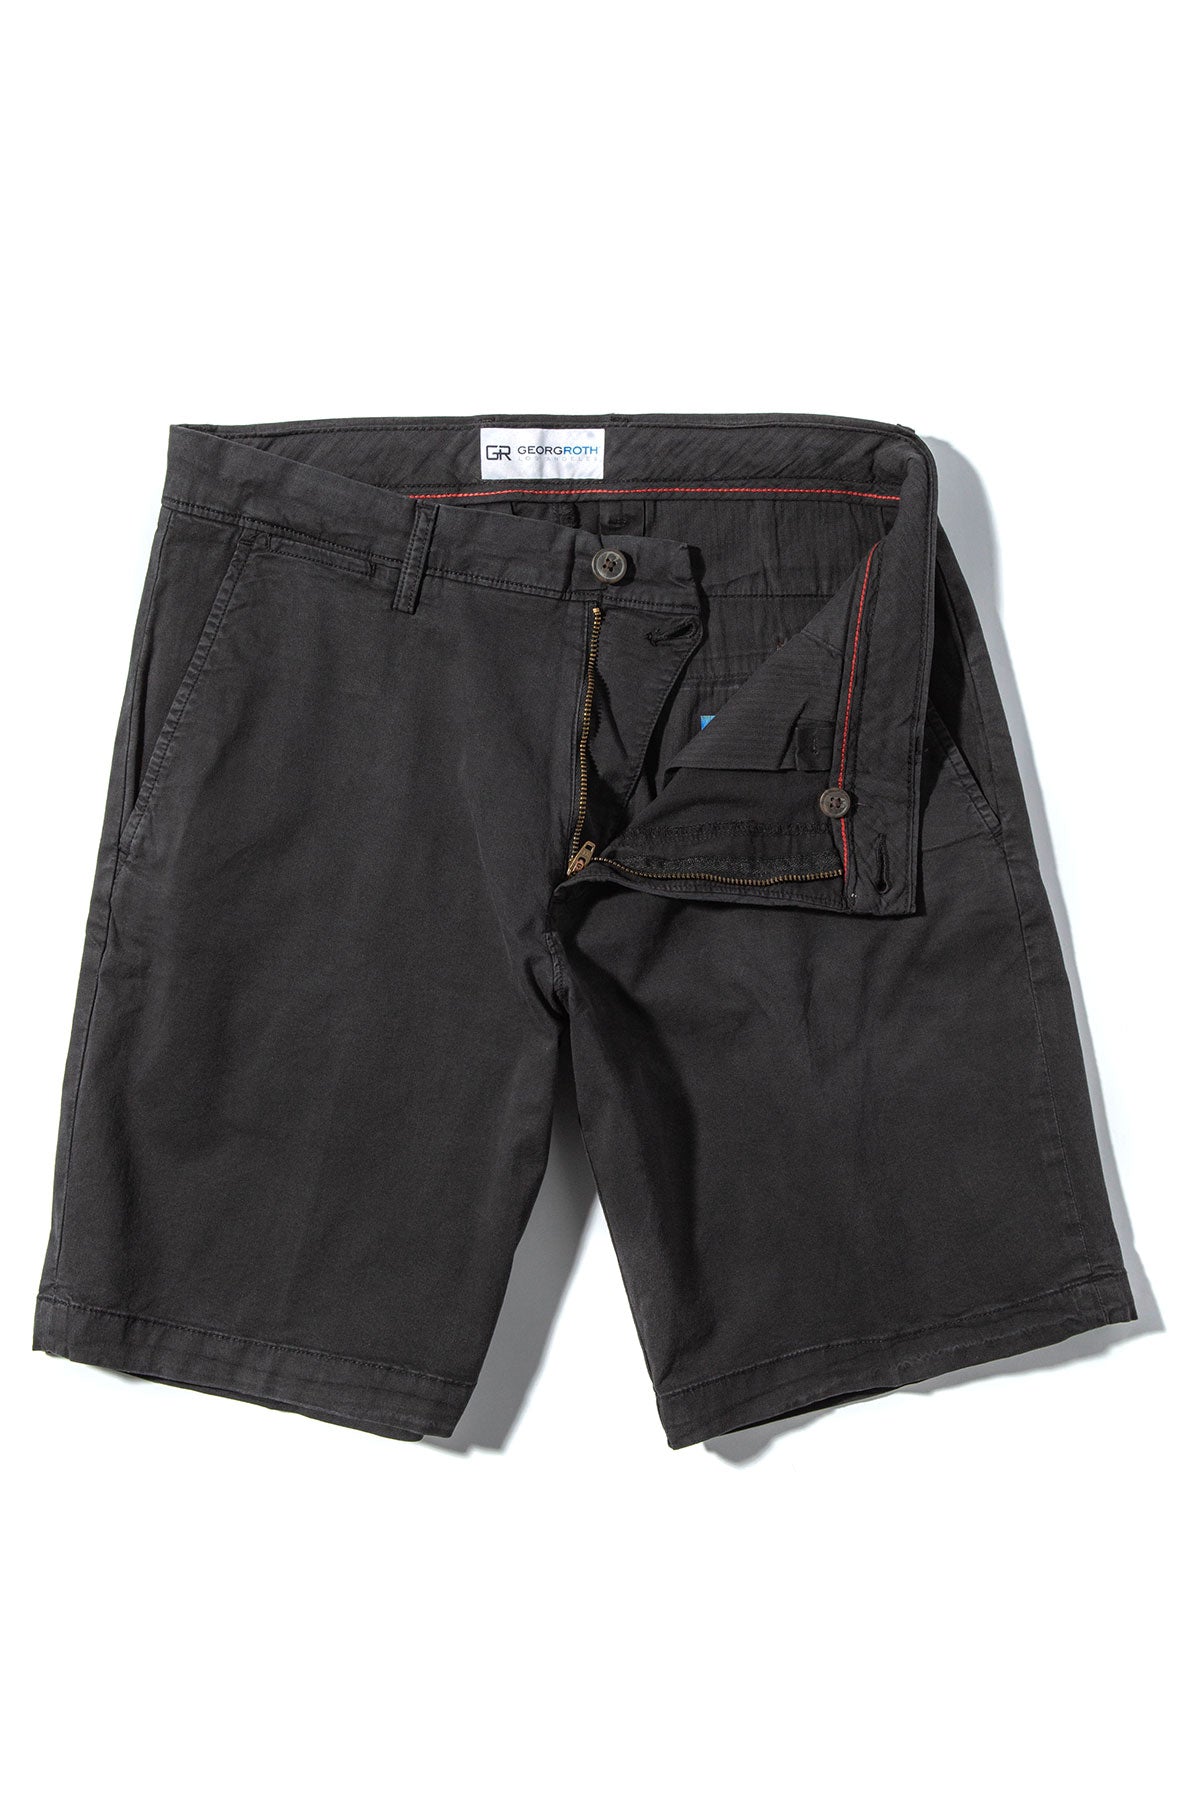 Rockport 9" Stretch Cotton Shorts in Off Black | Mens - Shorts | Georg Roth